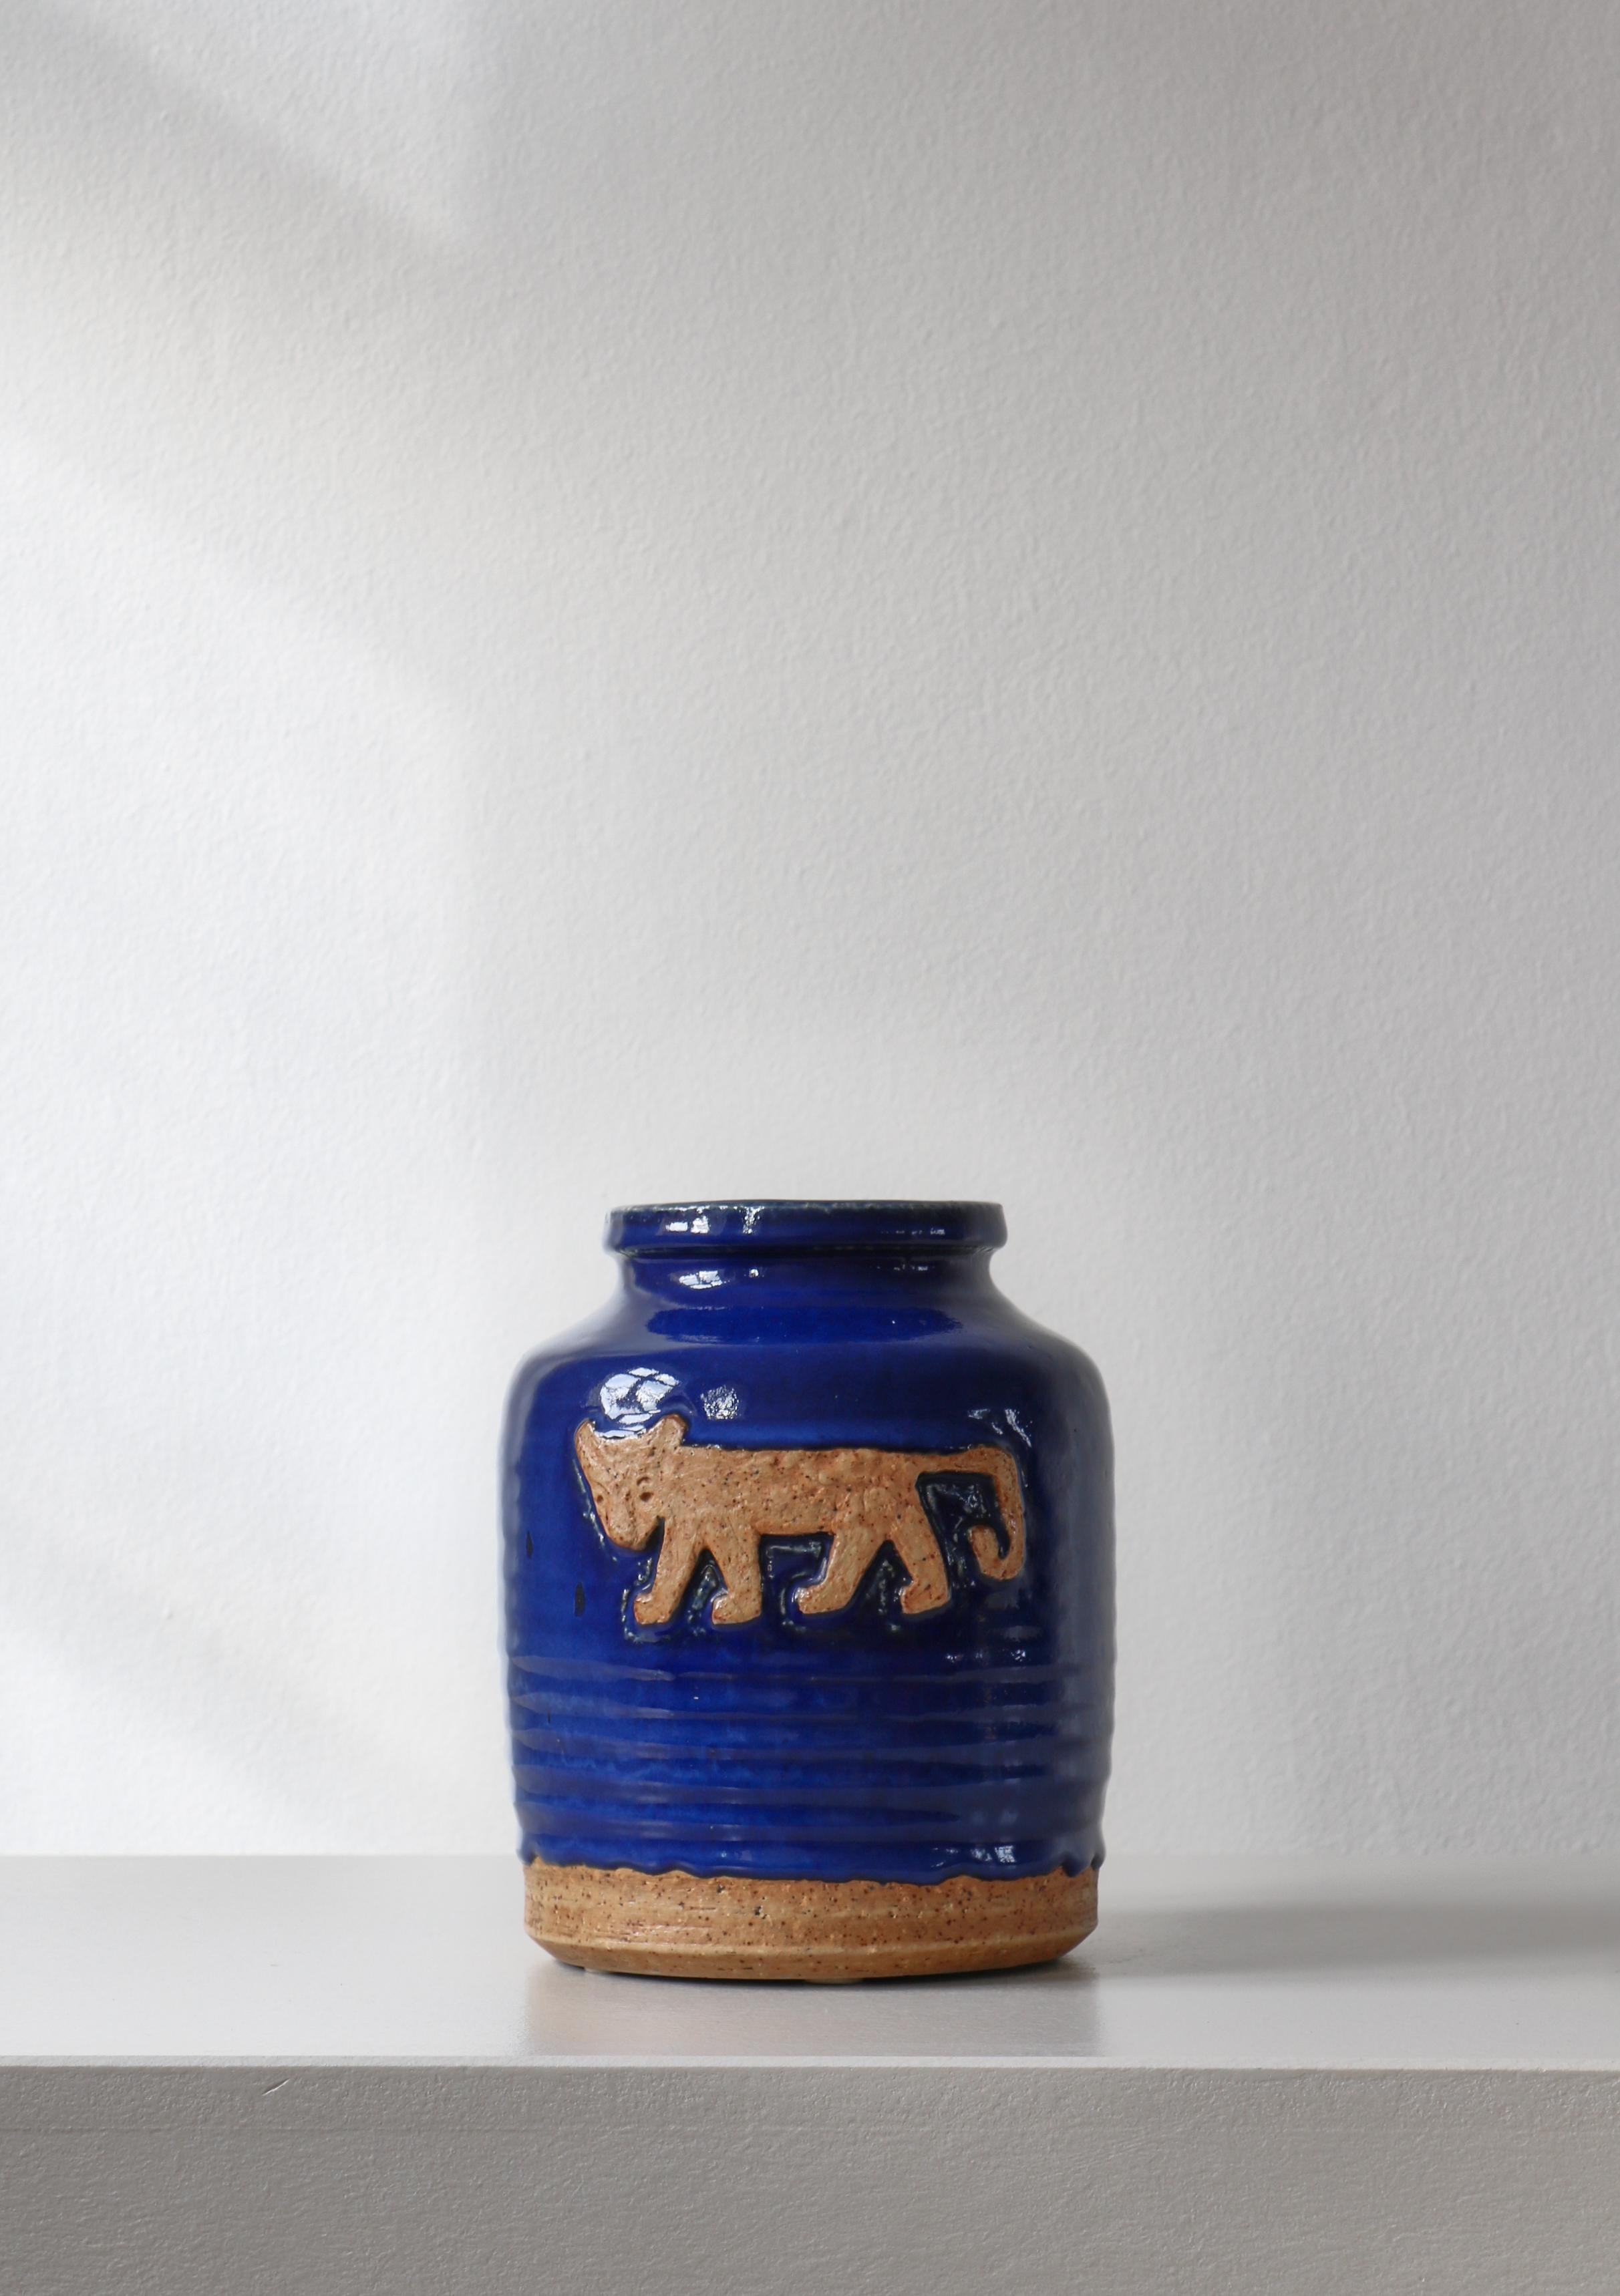 Unique stoneware vase made by Danish artist Jørgen Mogensen at Royal Copenhagen in the 1960s. Chamotte clay with relief decor and thick blue glazing. Signed 